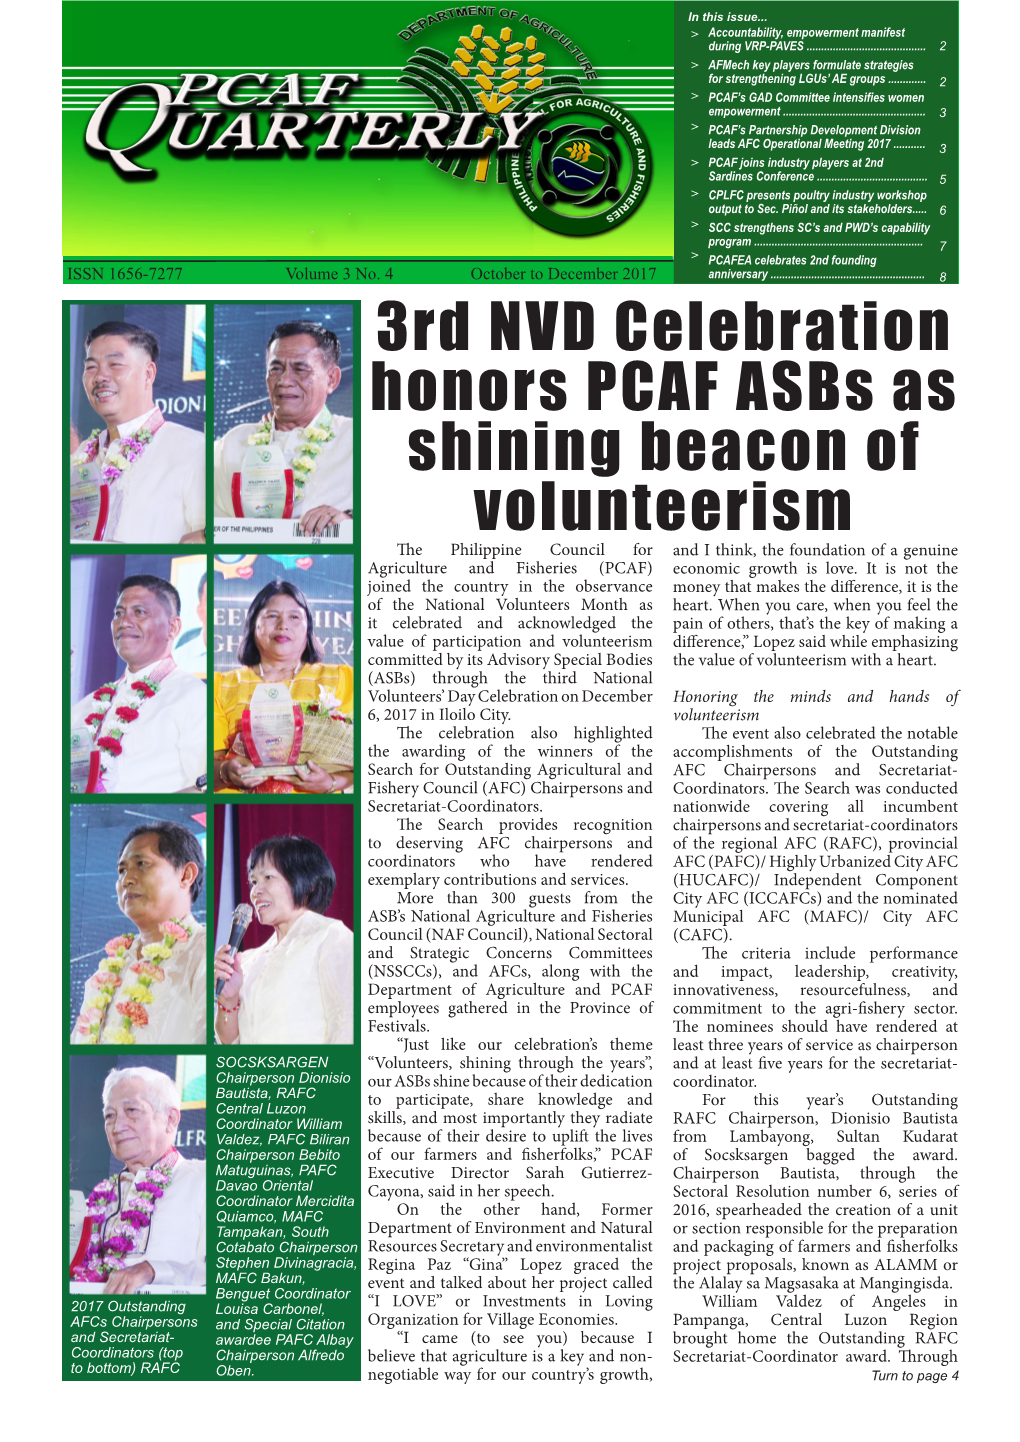 3Rd NVD Celebration Honors PCAF Asbs As Shining Beacon Of